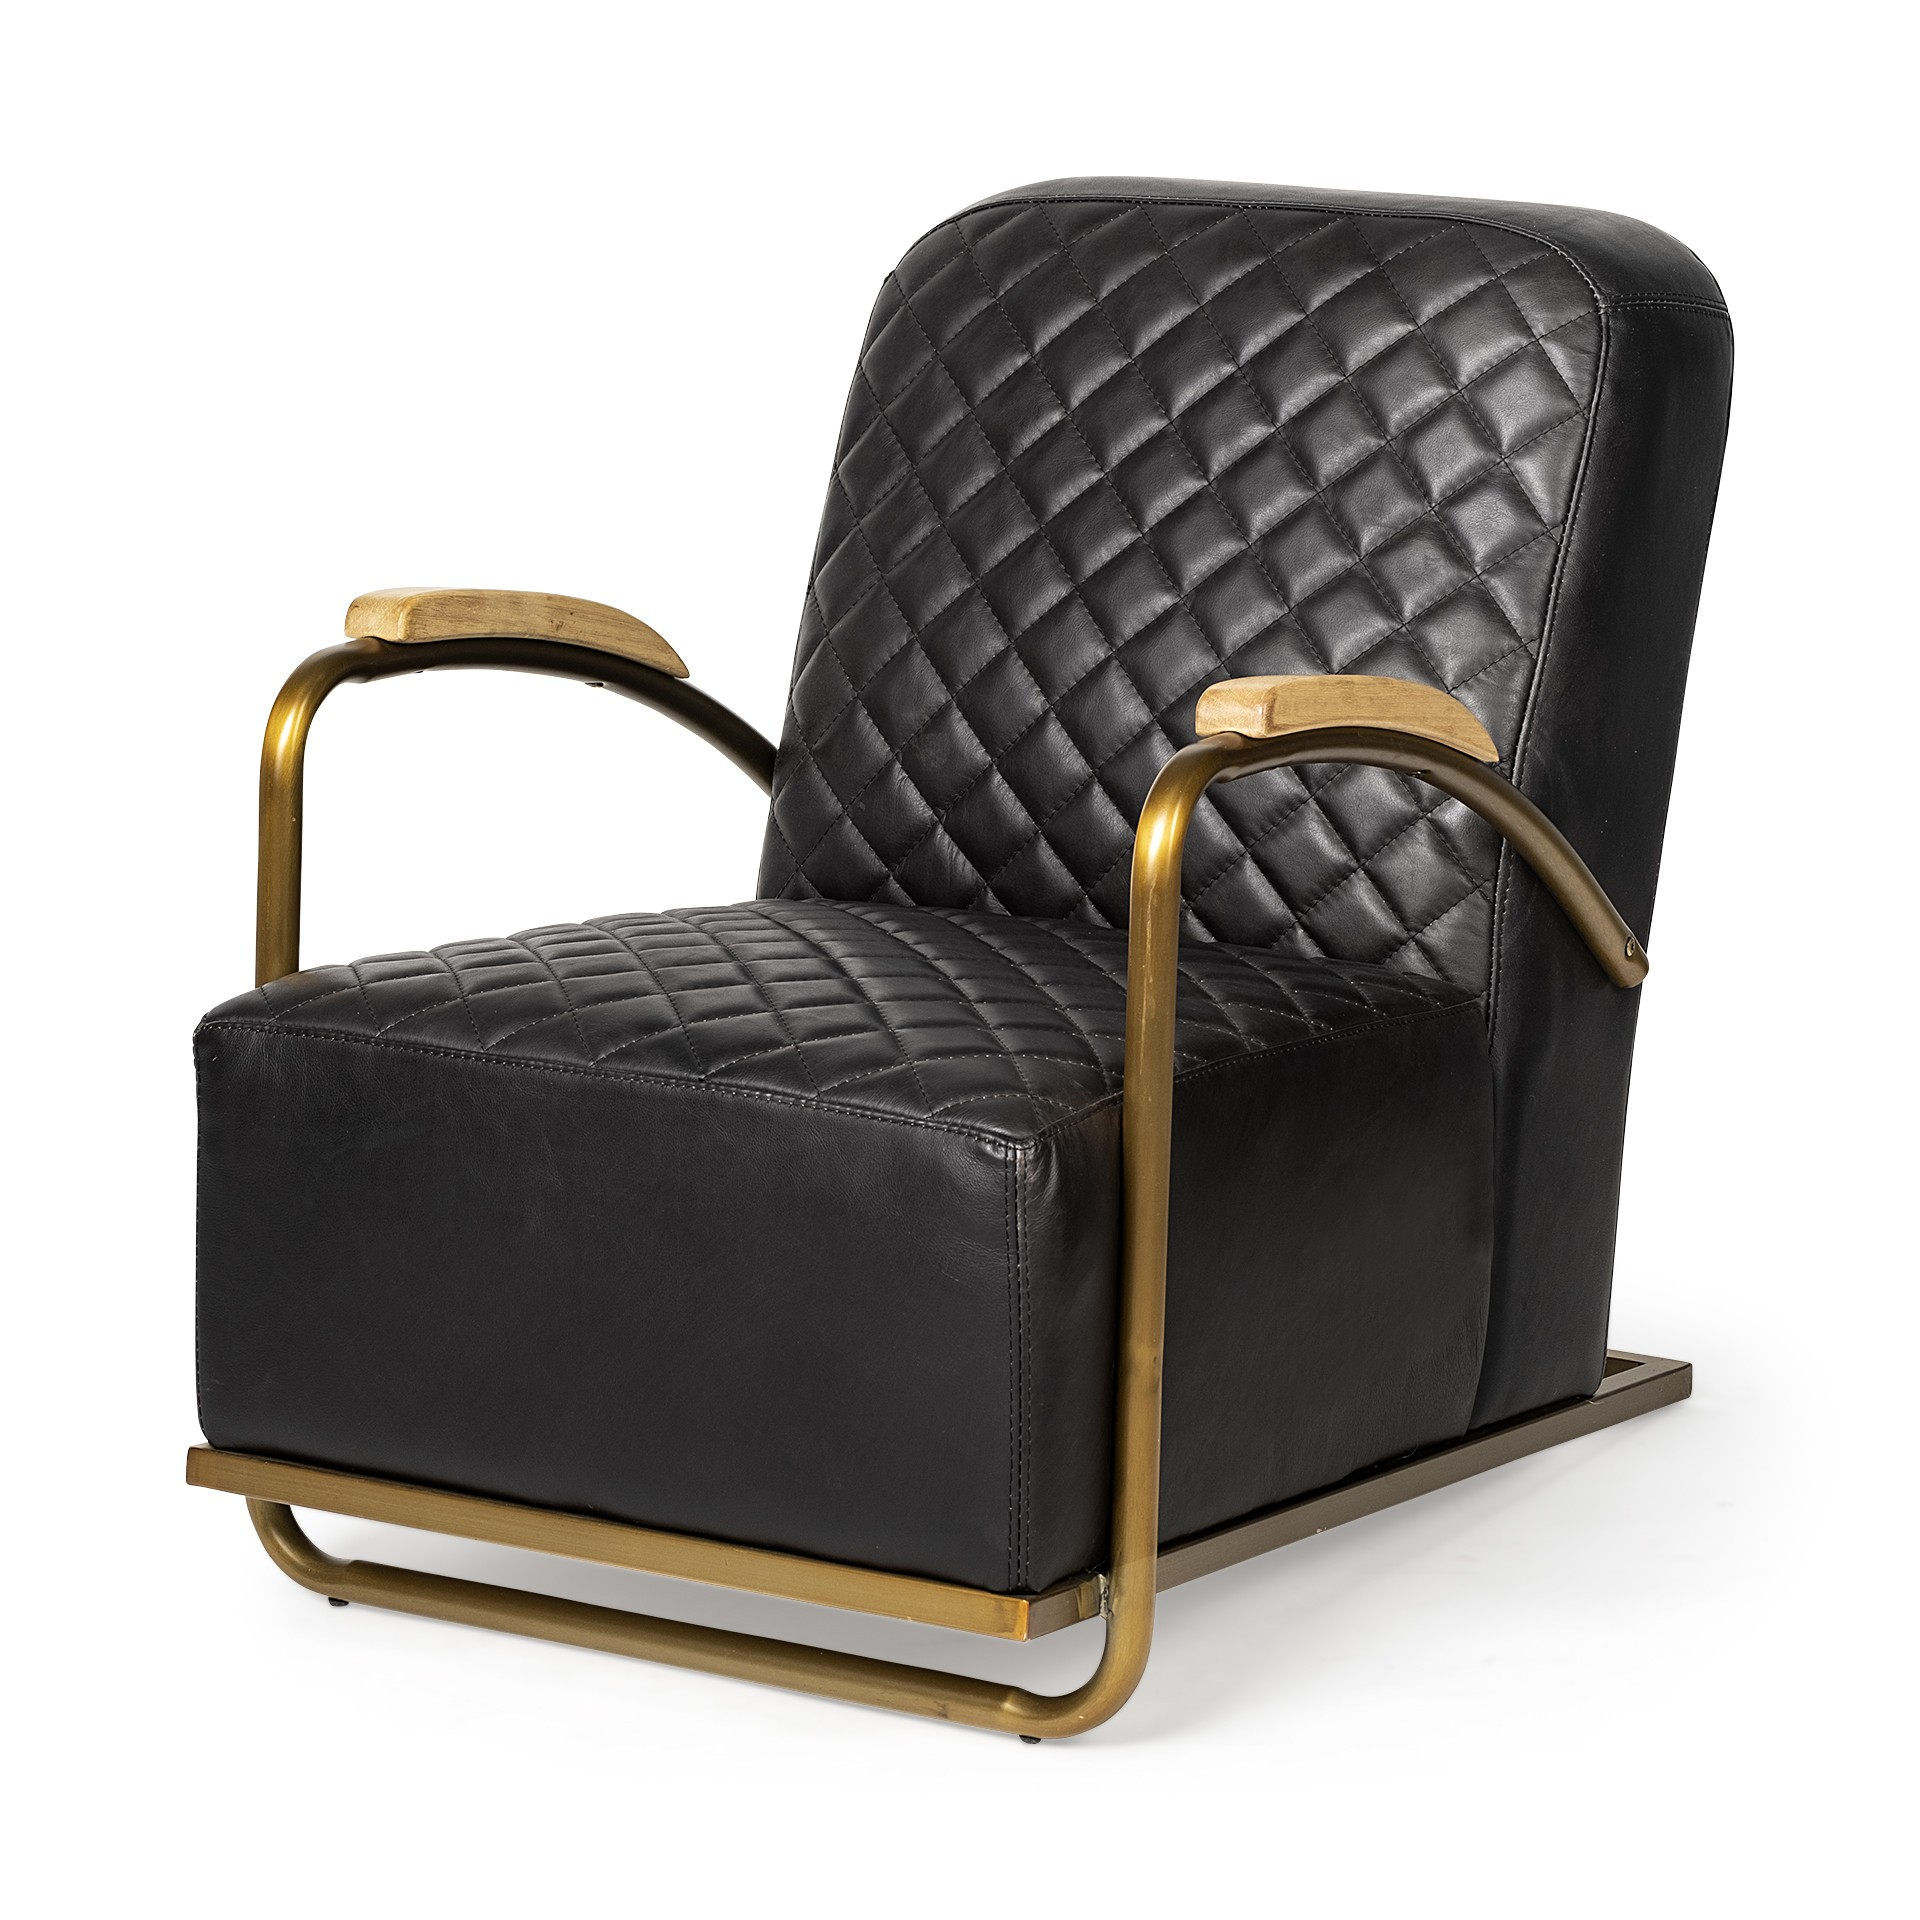 gorgeous leather chair with diamond pattern stiching and gold tone frame